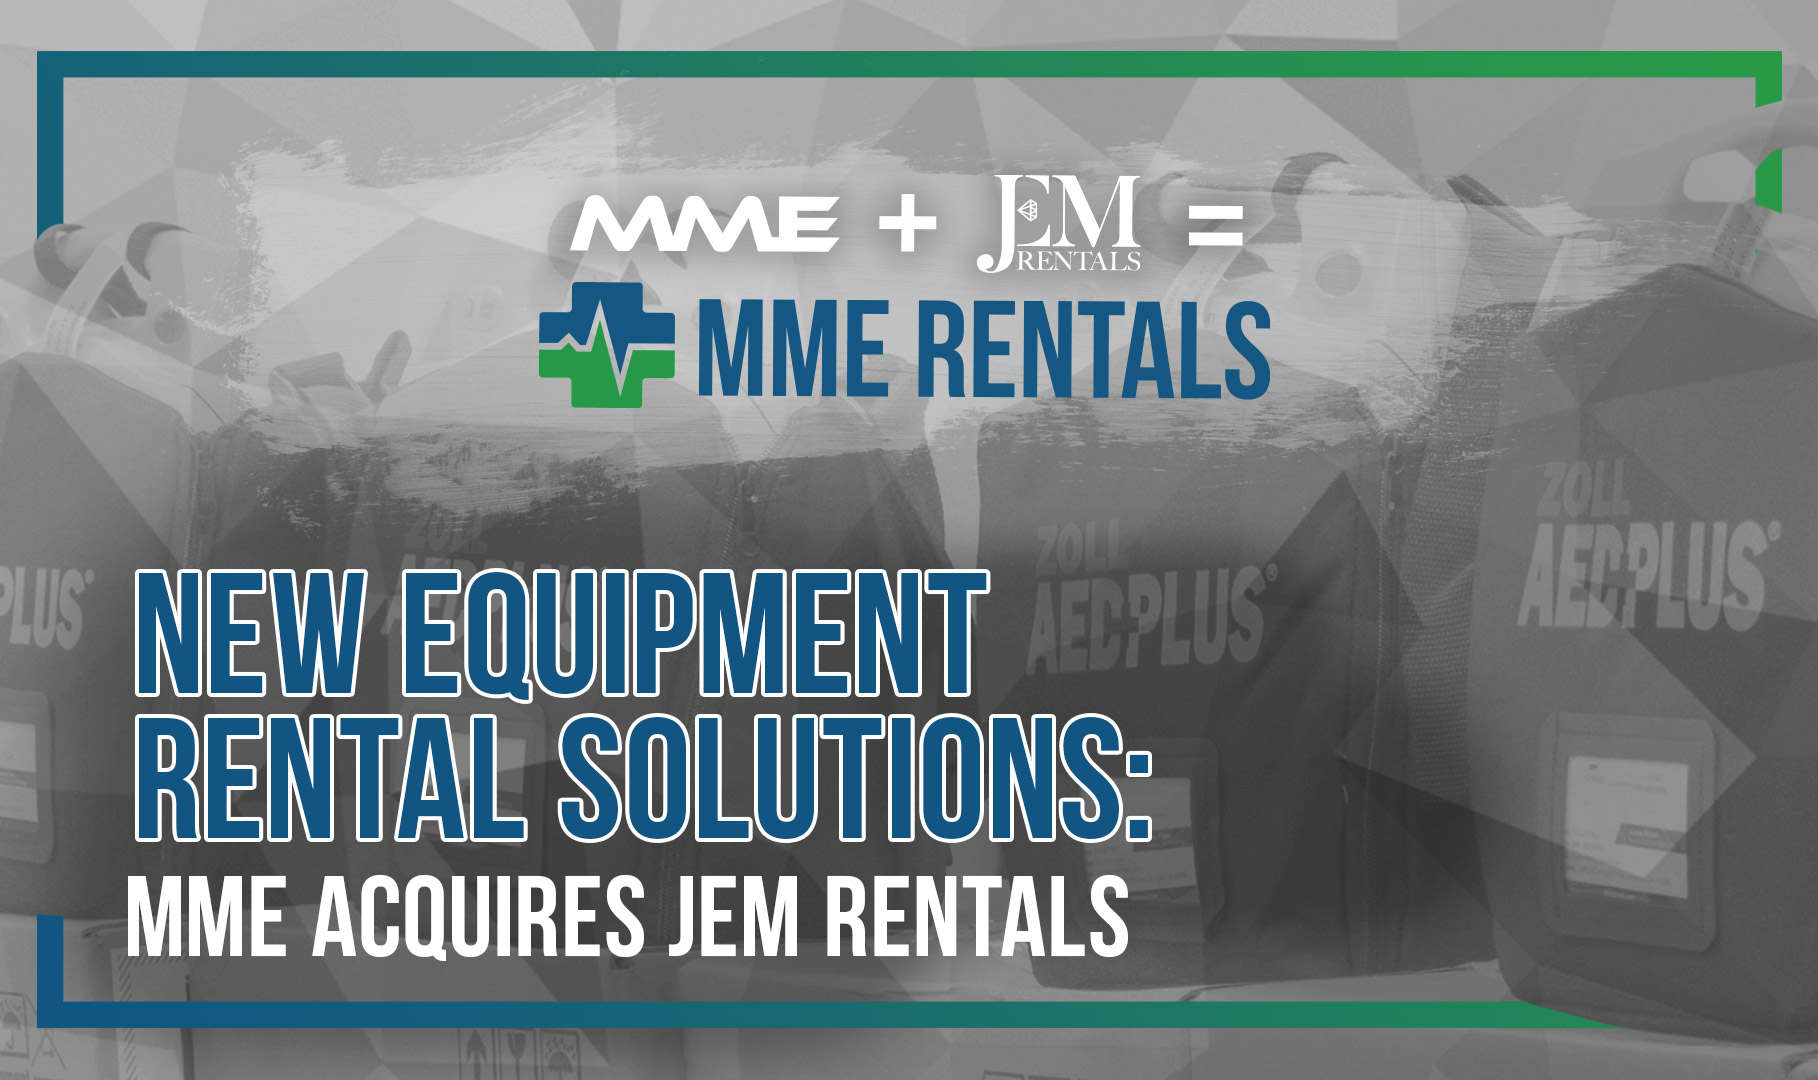 JEM is Now MME Rentals